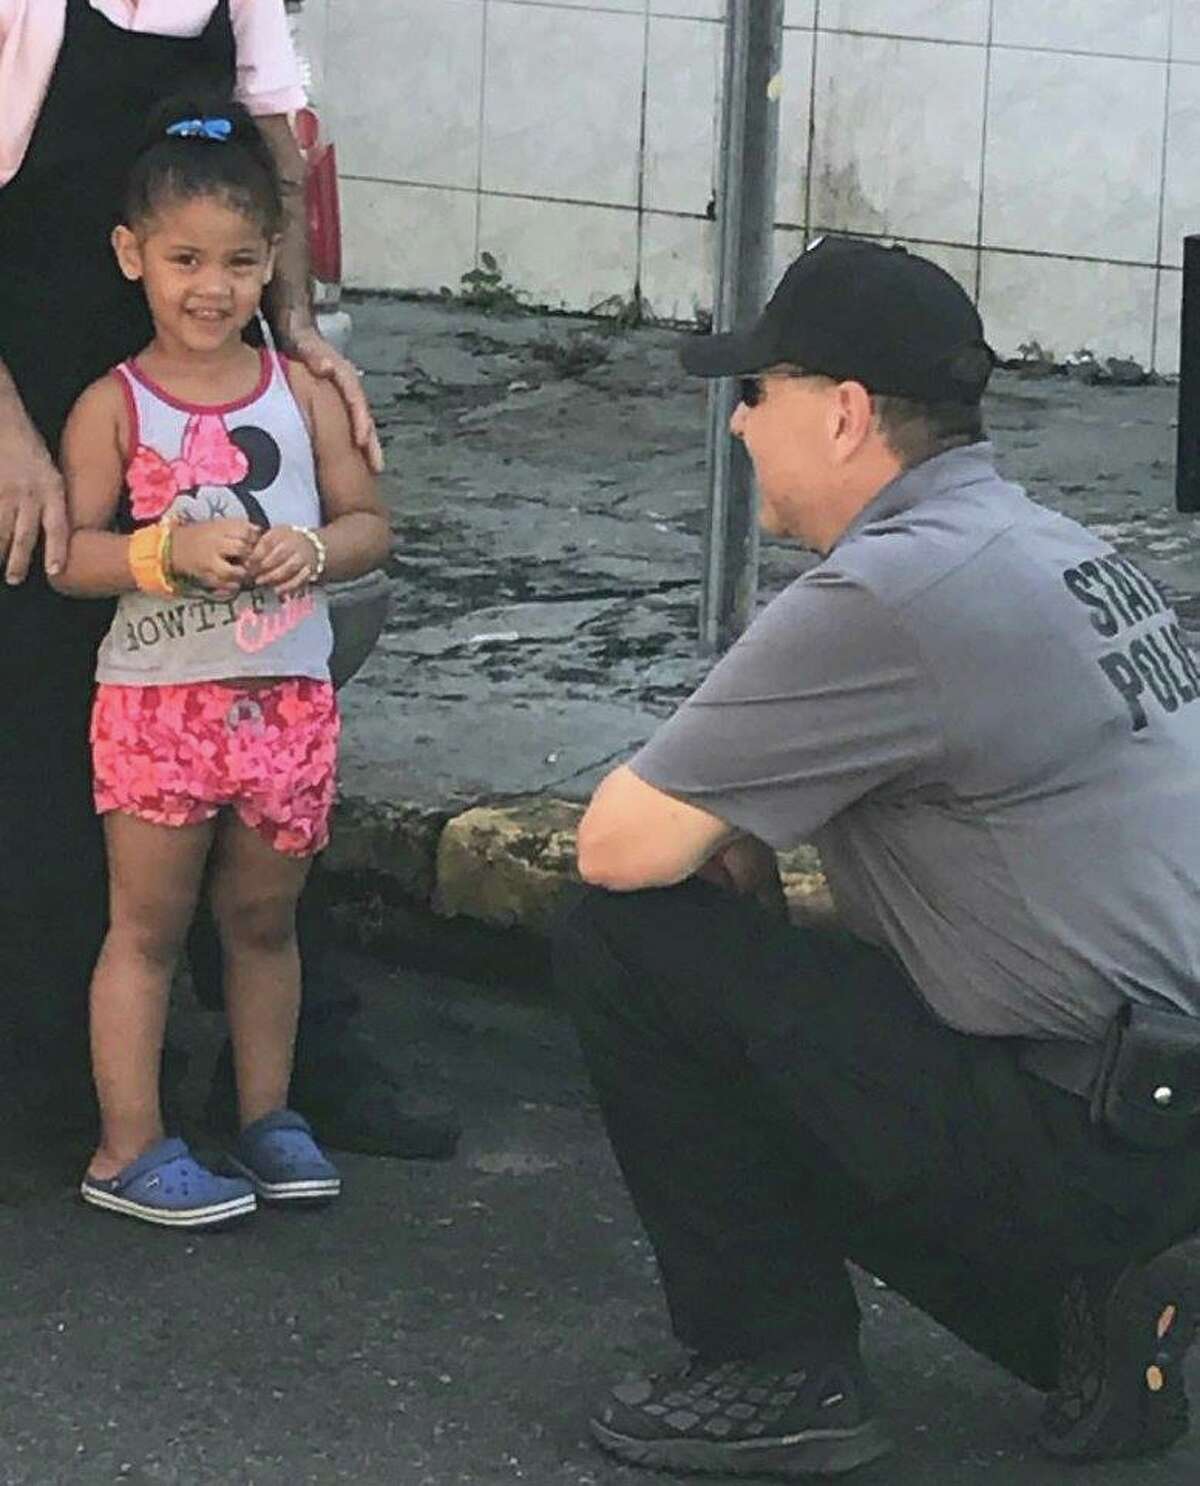 Click through for a slideshow of State Troopers helping out in Puerto Rica after Hurricane Maria. Troop G Zone Sgt. John Bellavigna talk to a little girl while conducting traffic stops in San Juan. Fifty-three troopers arrived in Puerto Rico on Friday, Sept. 29, 2017, to assist with law enforcement and humanitarian aid efforts as the U.S. territory recovers from the devastation of Hurricane Maria.